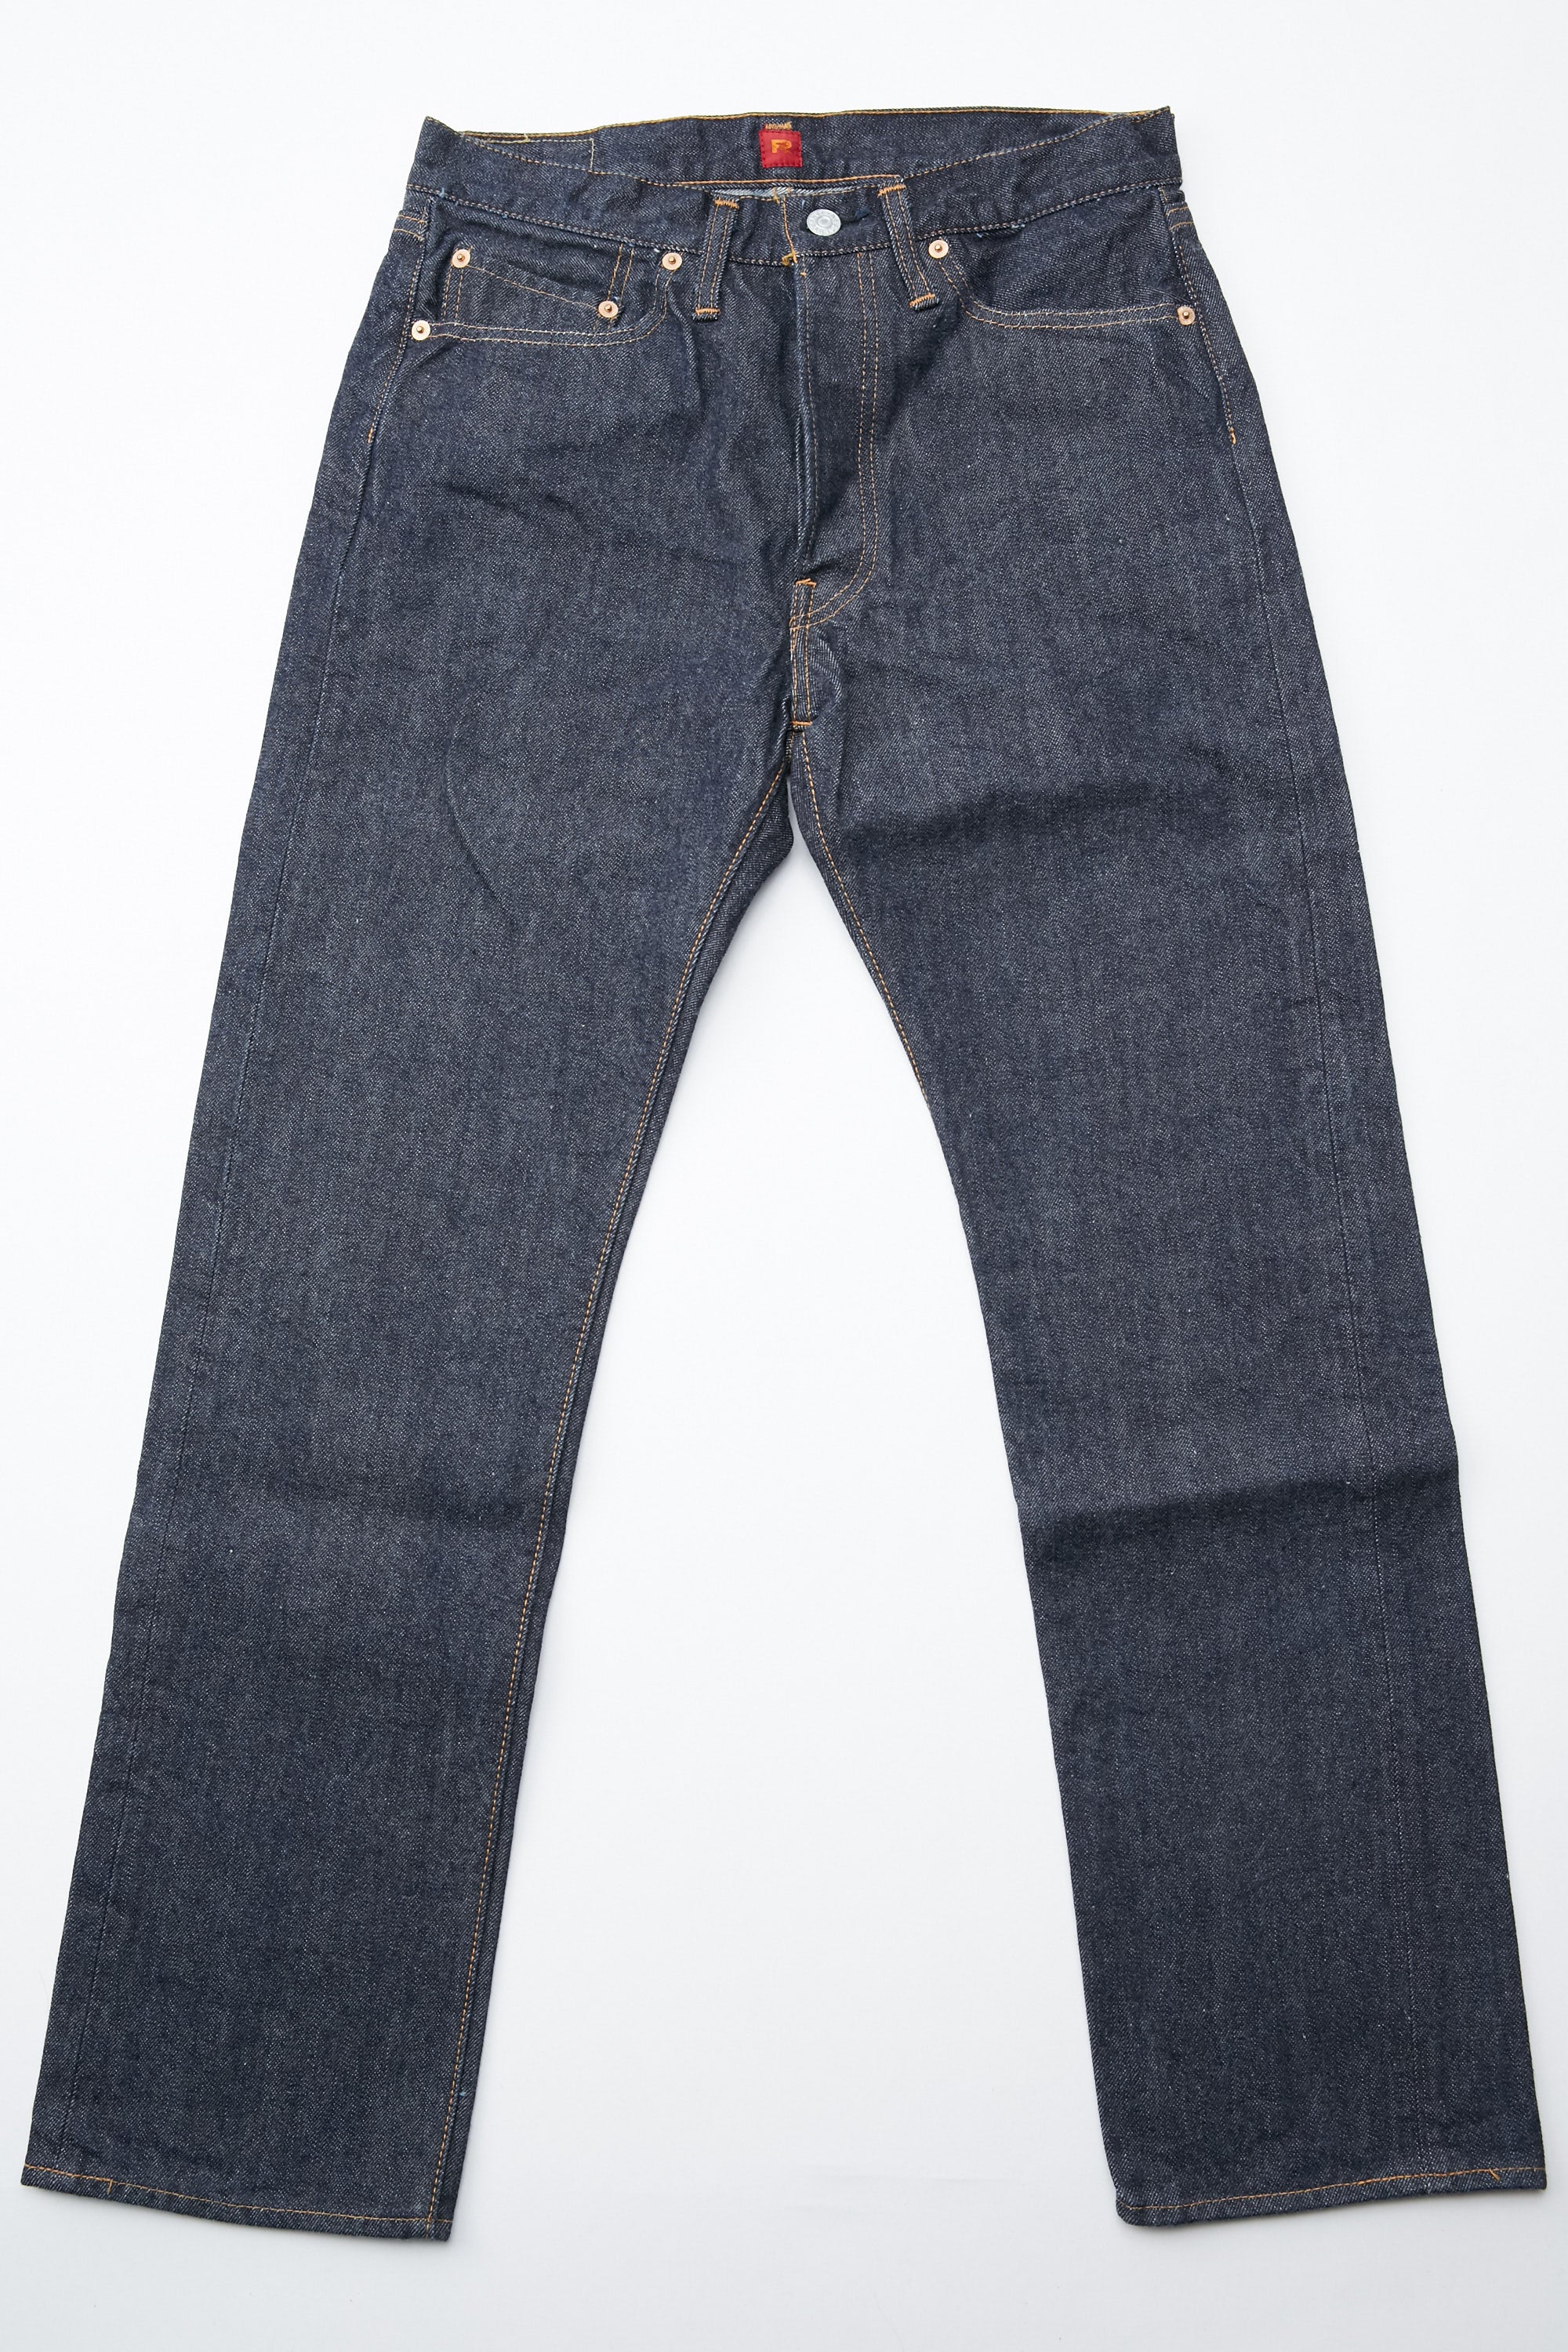 resolute jeans 710